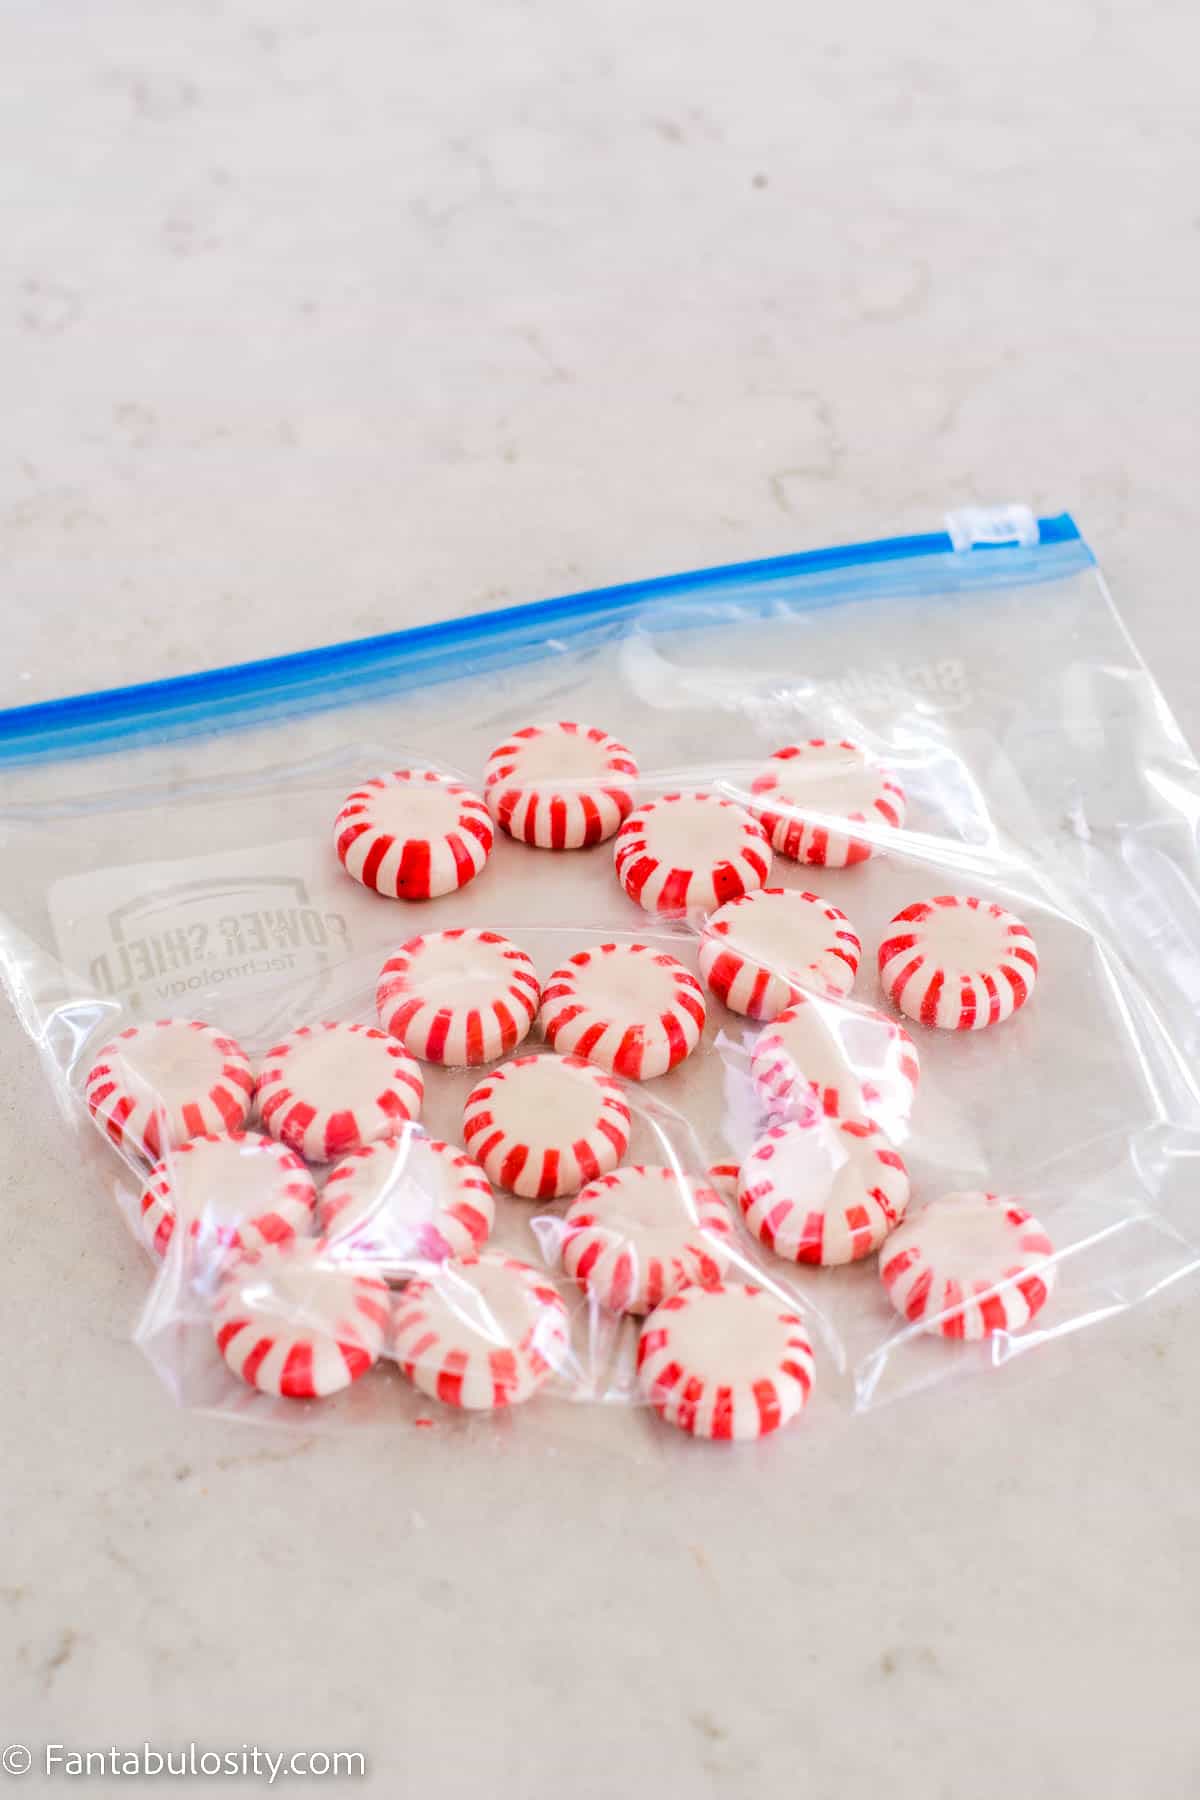 Peppermint candies in plastic bag